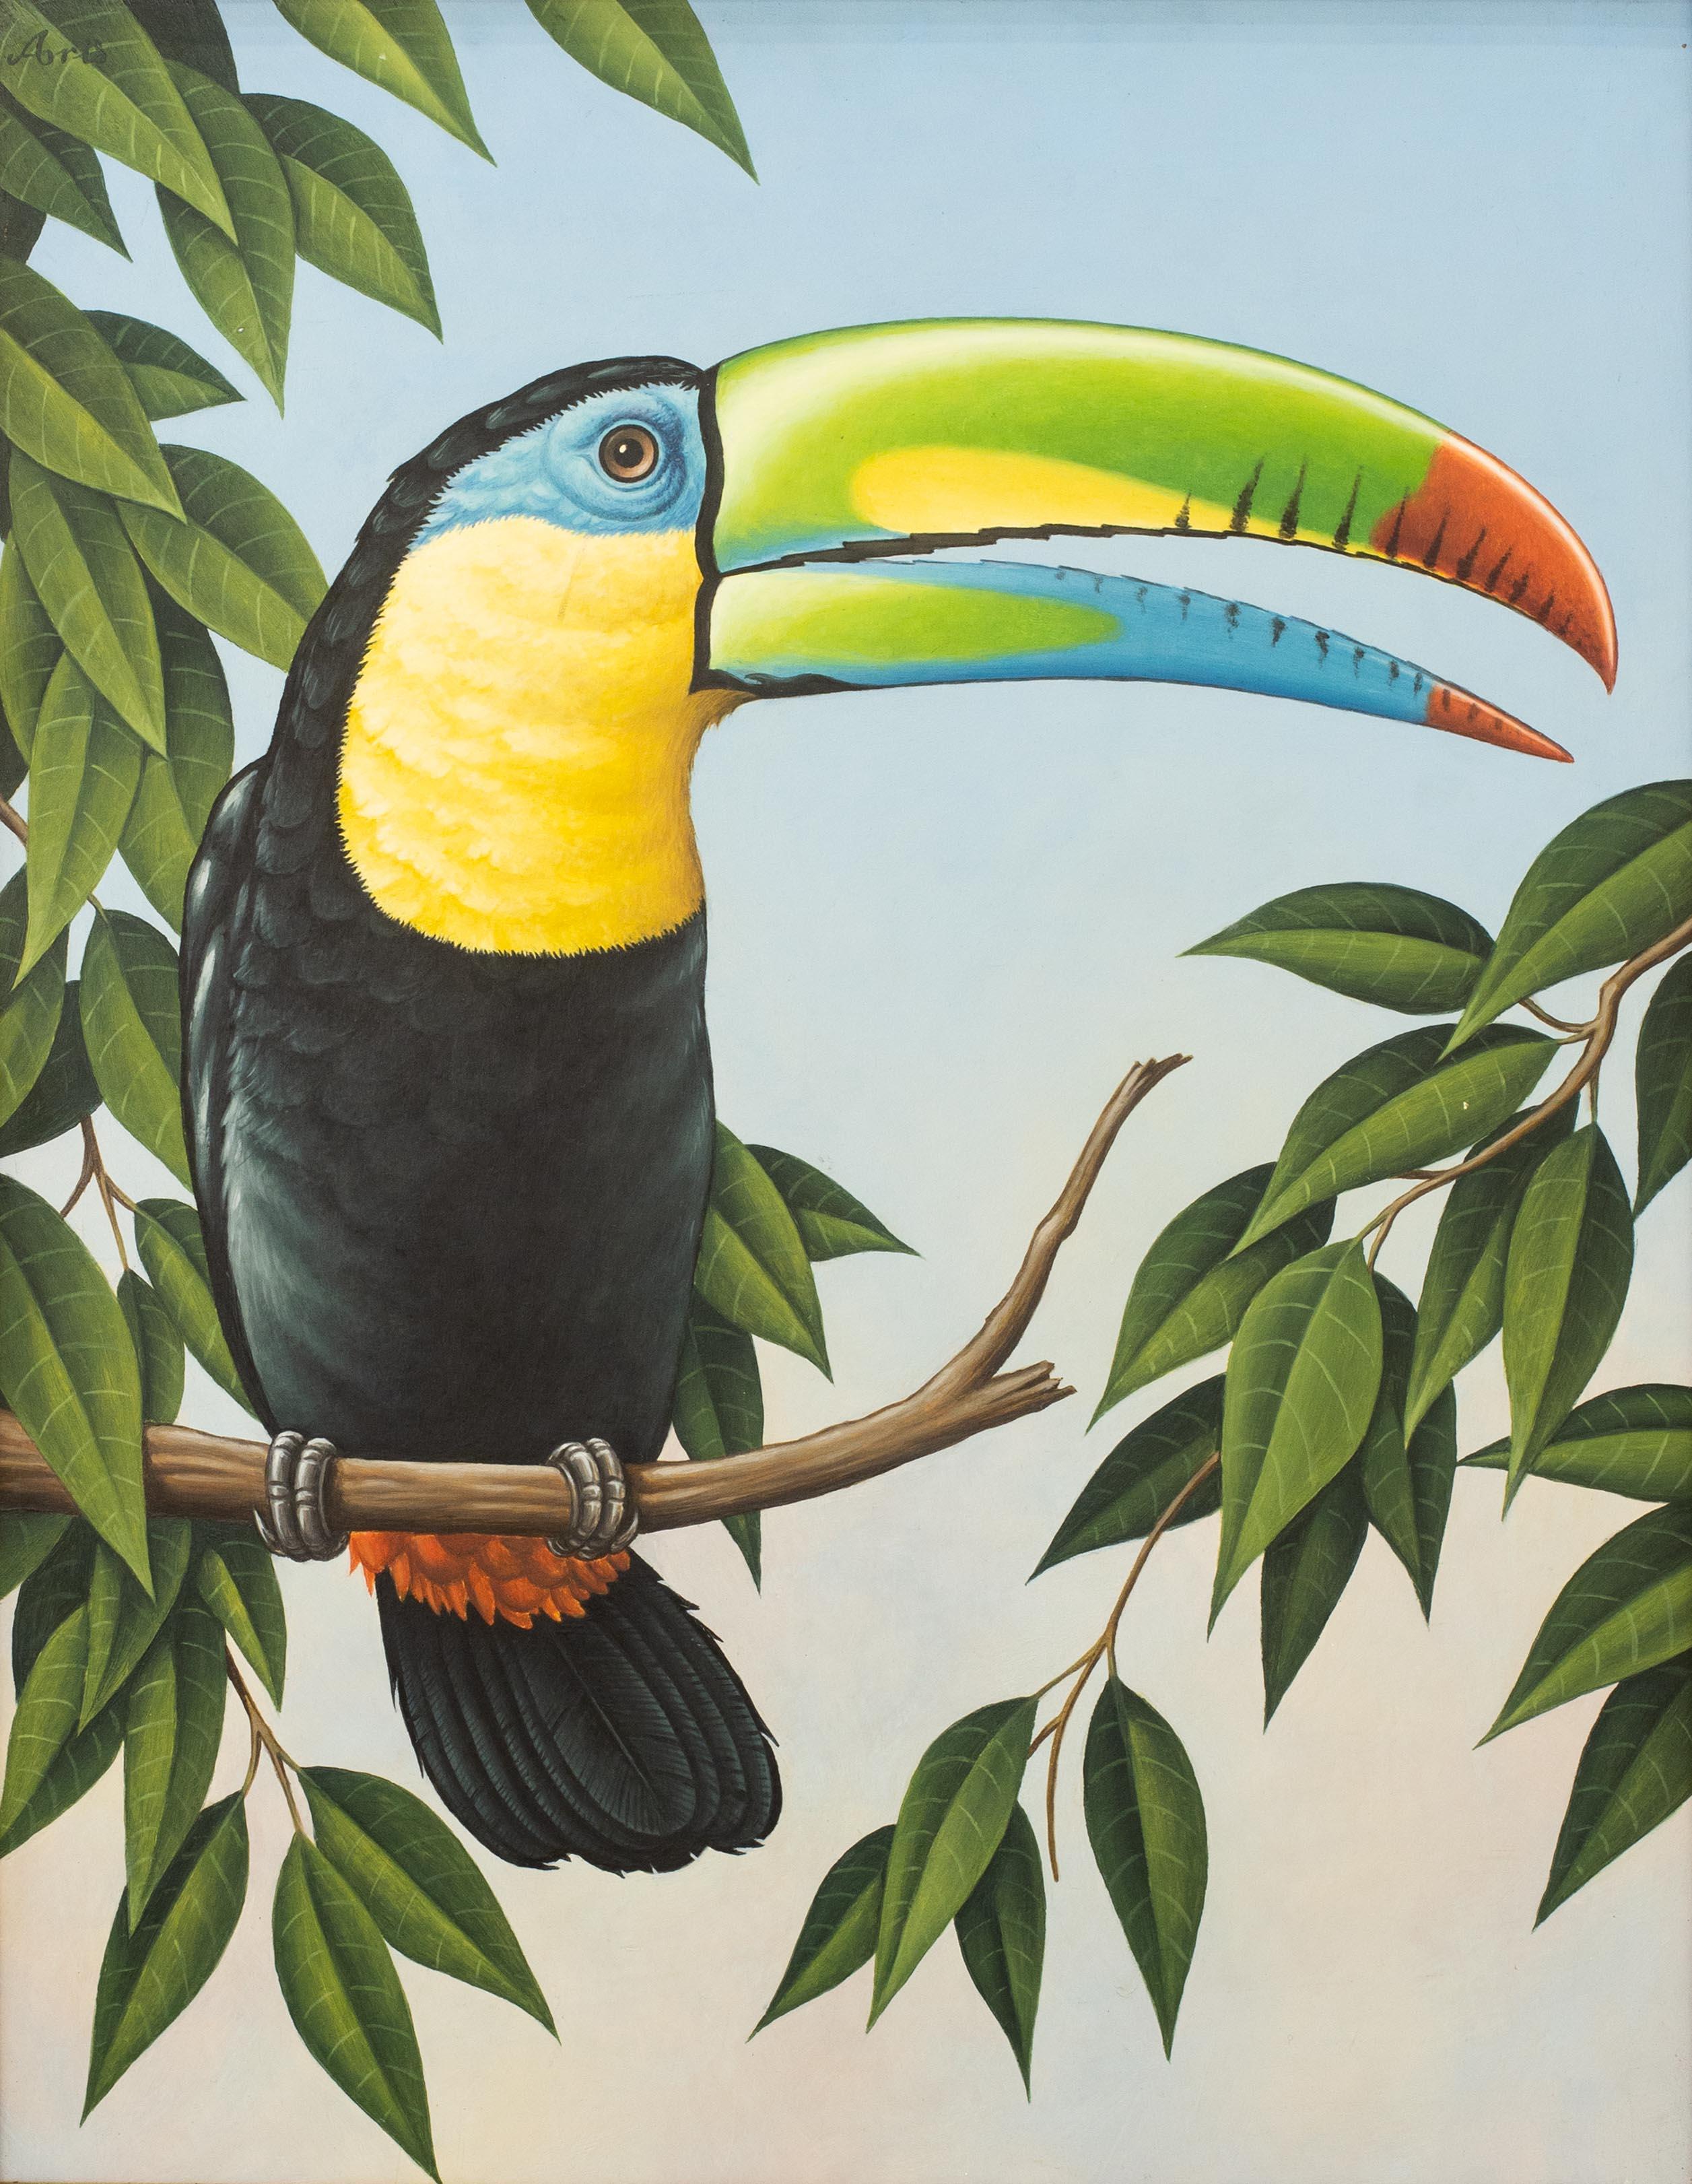 Fred Aris (British, 1932 - 1995)
Toucan
oil on panel
signed (upper left)
18.1/8 x 14 in. (46 x 35.5 cm.)
Provenance: The Portal Gallery, London